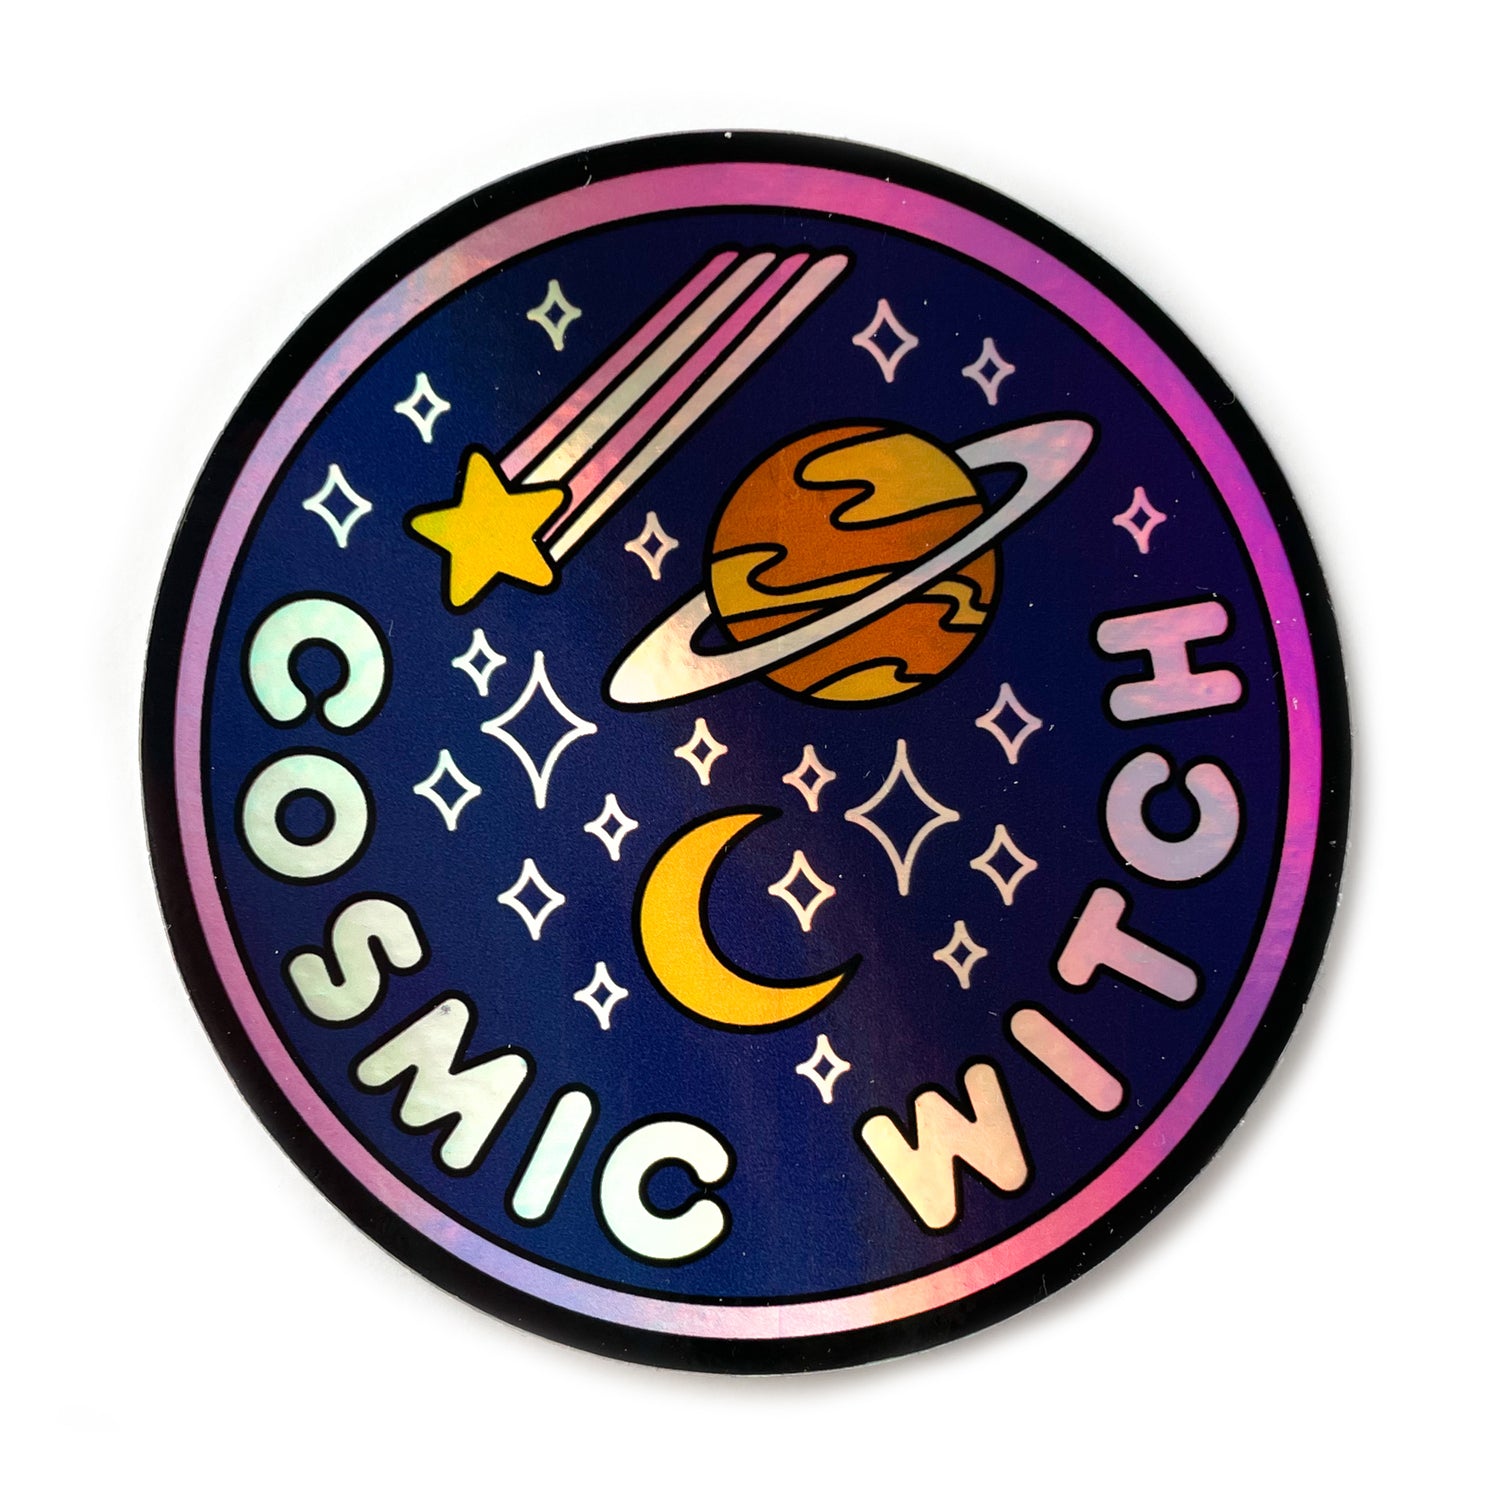 A circular holographic sticker. It has a hot pink border and a dark blue background with light pink words that read "Cosmic Witch". Depicted above the words are a crescent moon, sparkle stars, a shooting star, and the planet Saturn. 